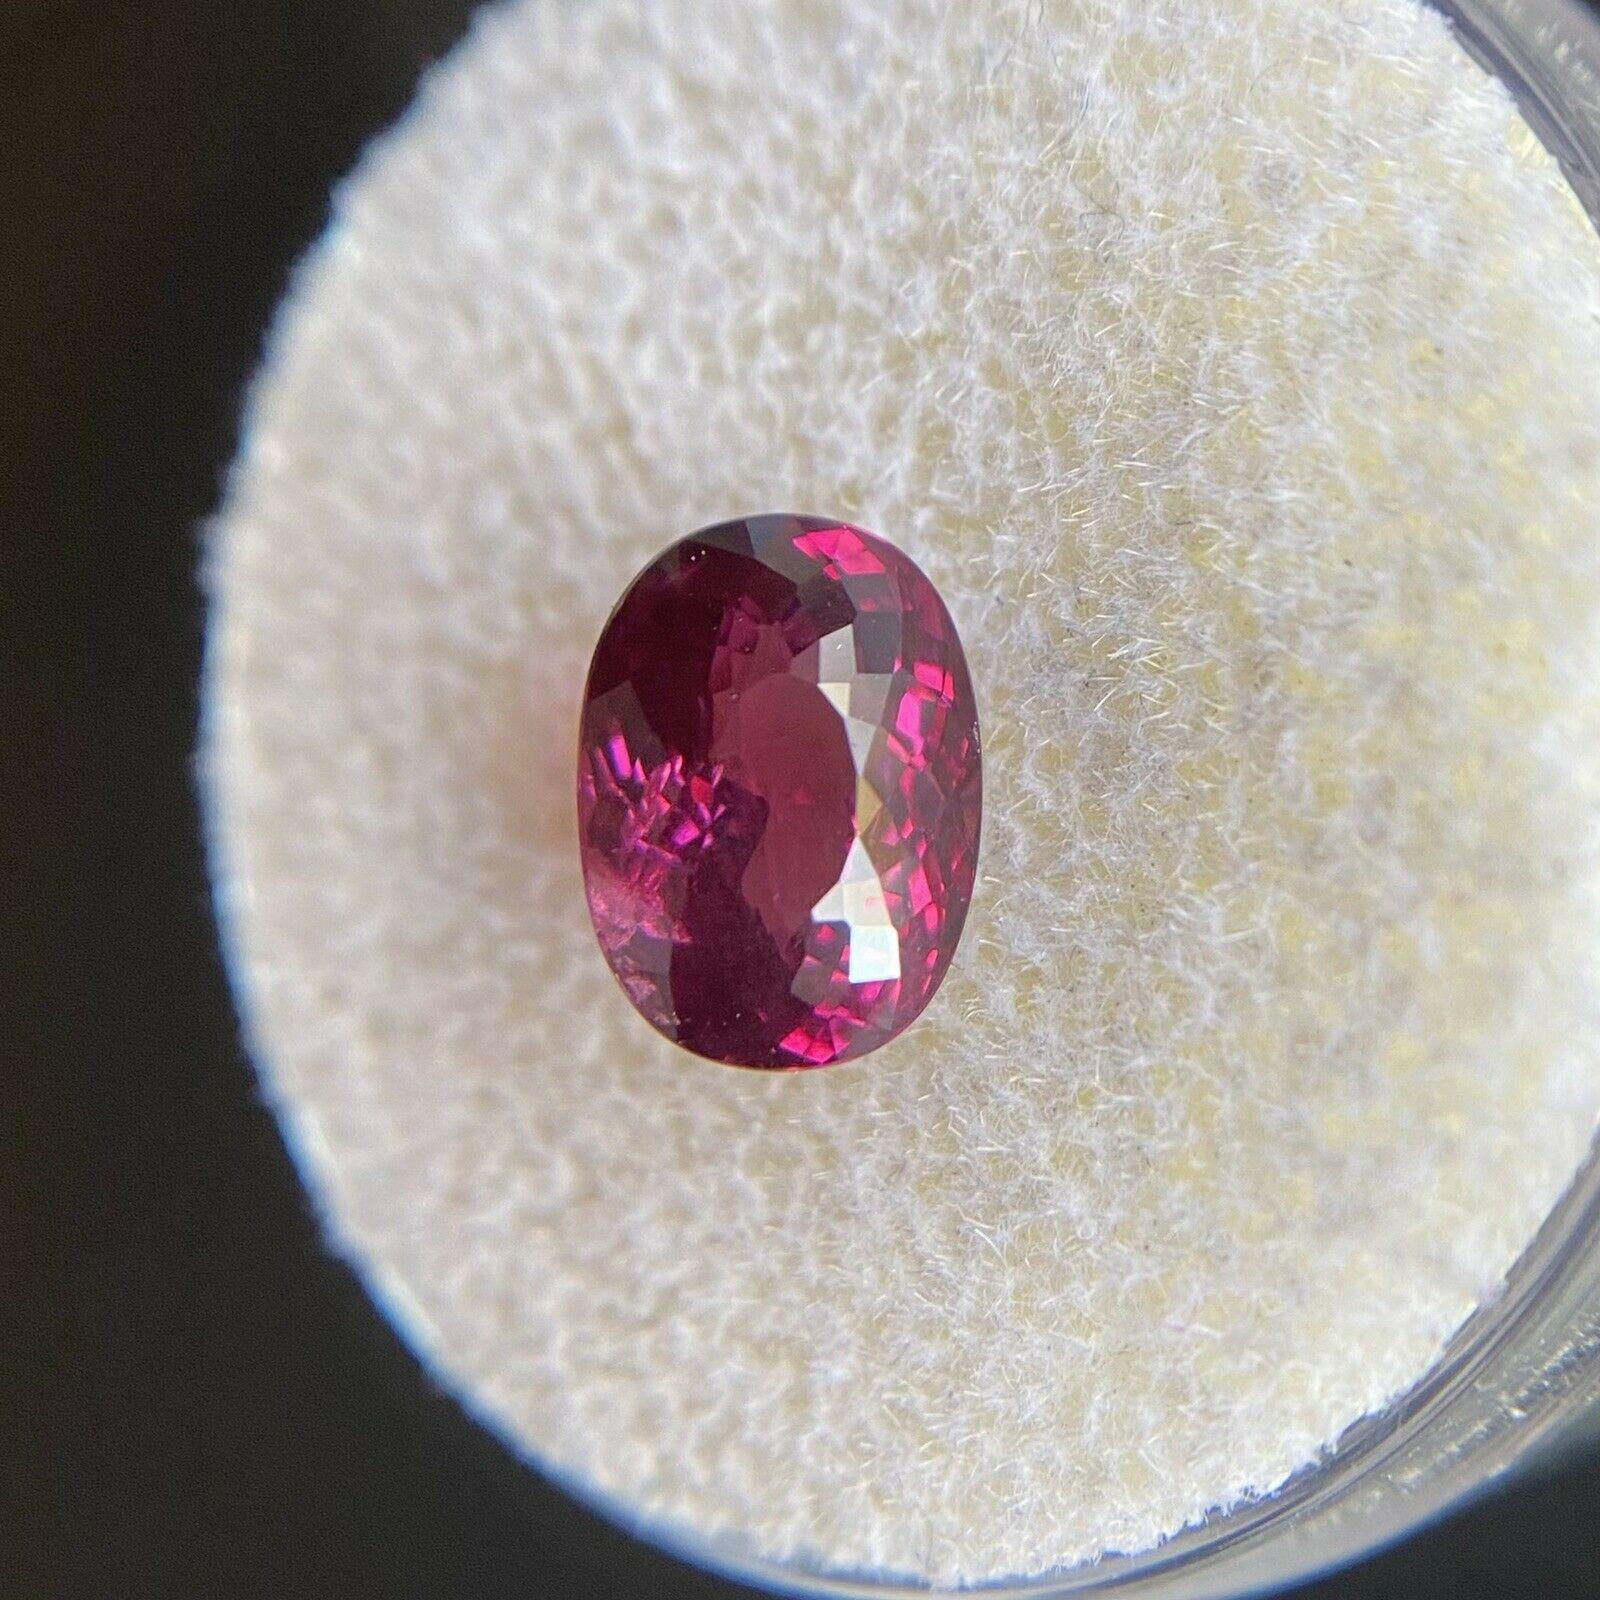 2.50ct Vivid Purple Pink Rhodolite Garnet Fancy Oval Cut Loose Gem 8.8 x 6.3mm

Natural Rhodolite Garnet Loose Gemstone. 
2.50 Carat with a beautiful vivid purple pink colour and very good clarity. A clean stone with only small natural inclusions